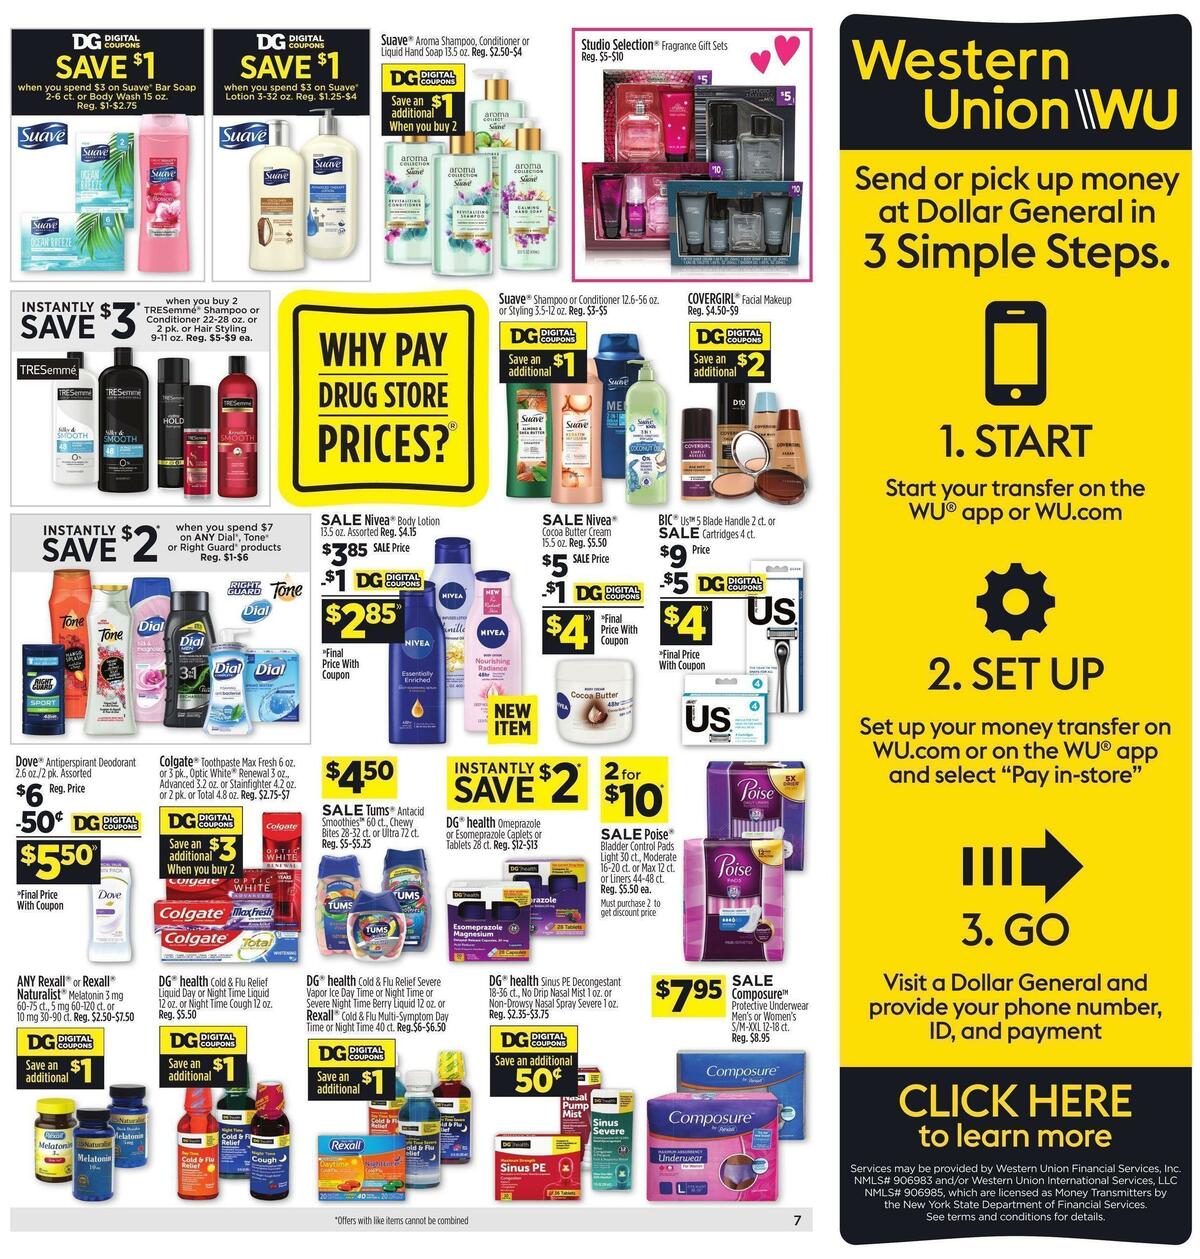 Dollar General Market Ad Weekly Ad from January 30